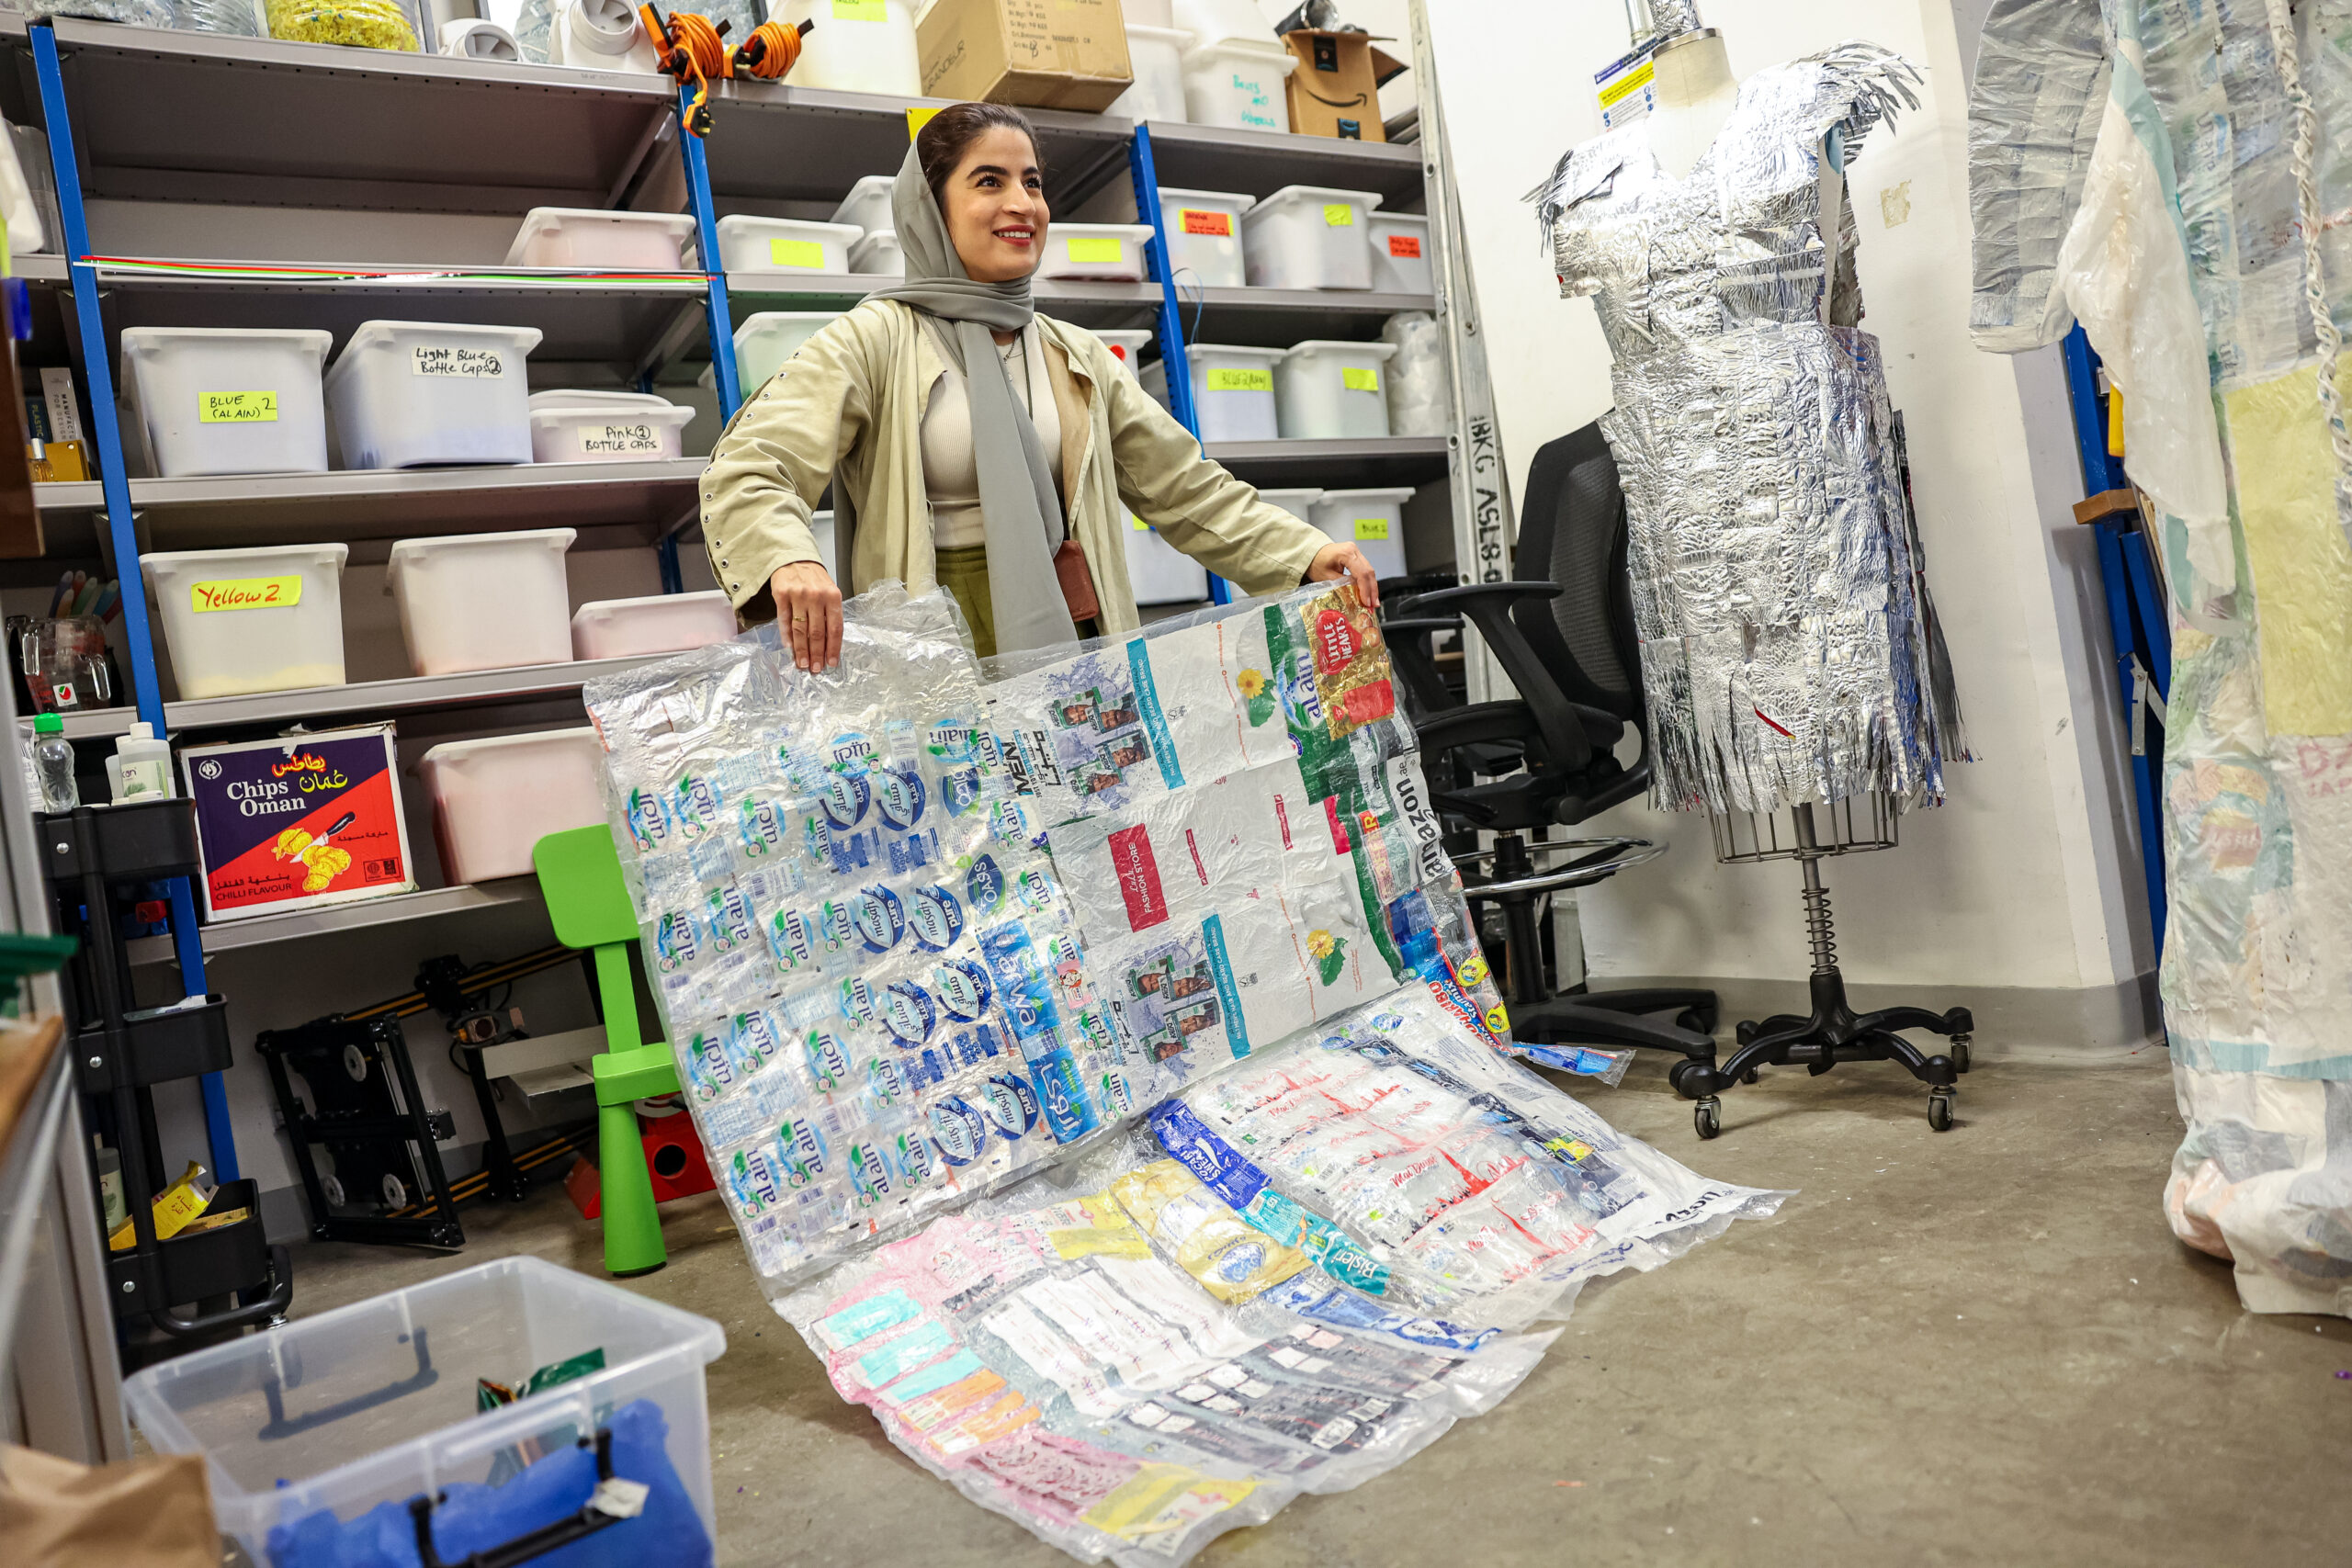 A female-presenting student holding a quilt made out of various recycled plastics.